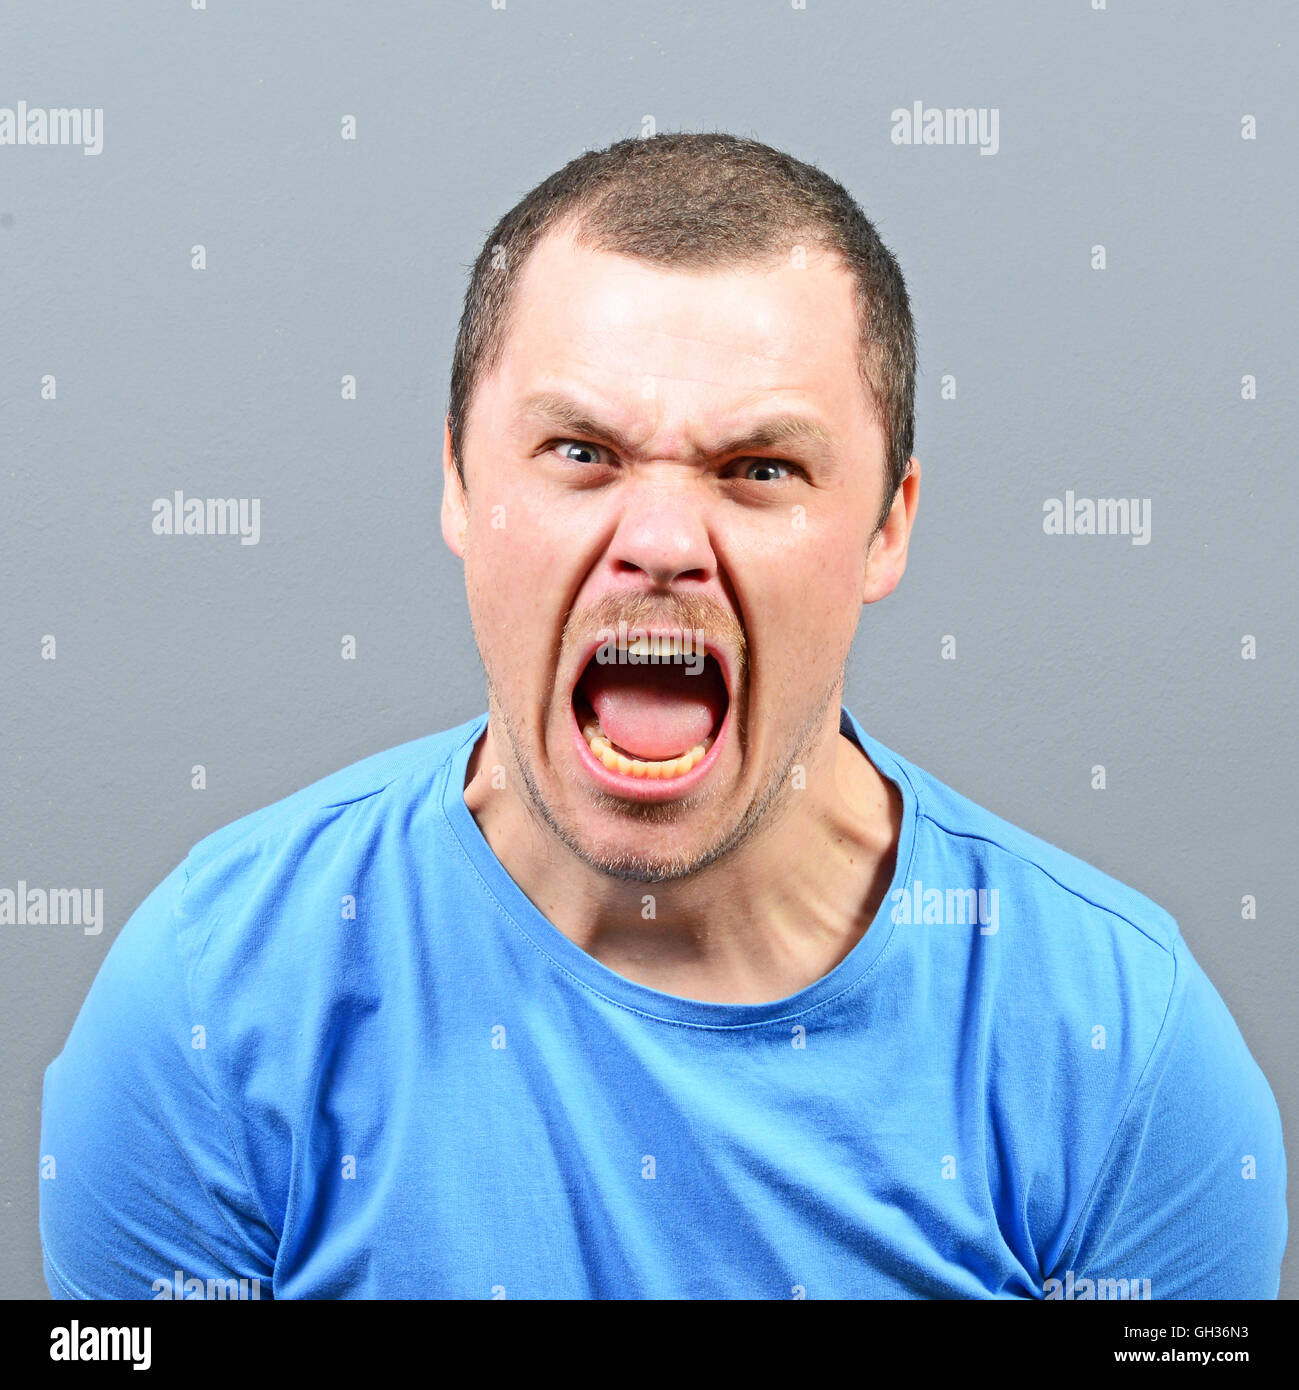 Portrait of a angry man screaming against gray background Stock Photo